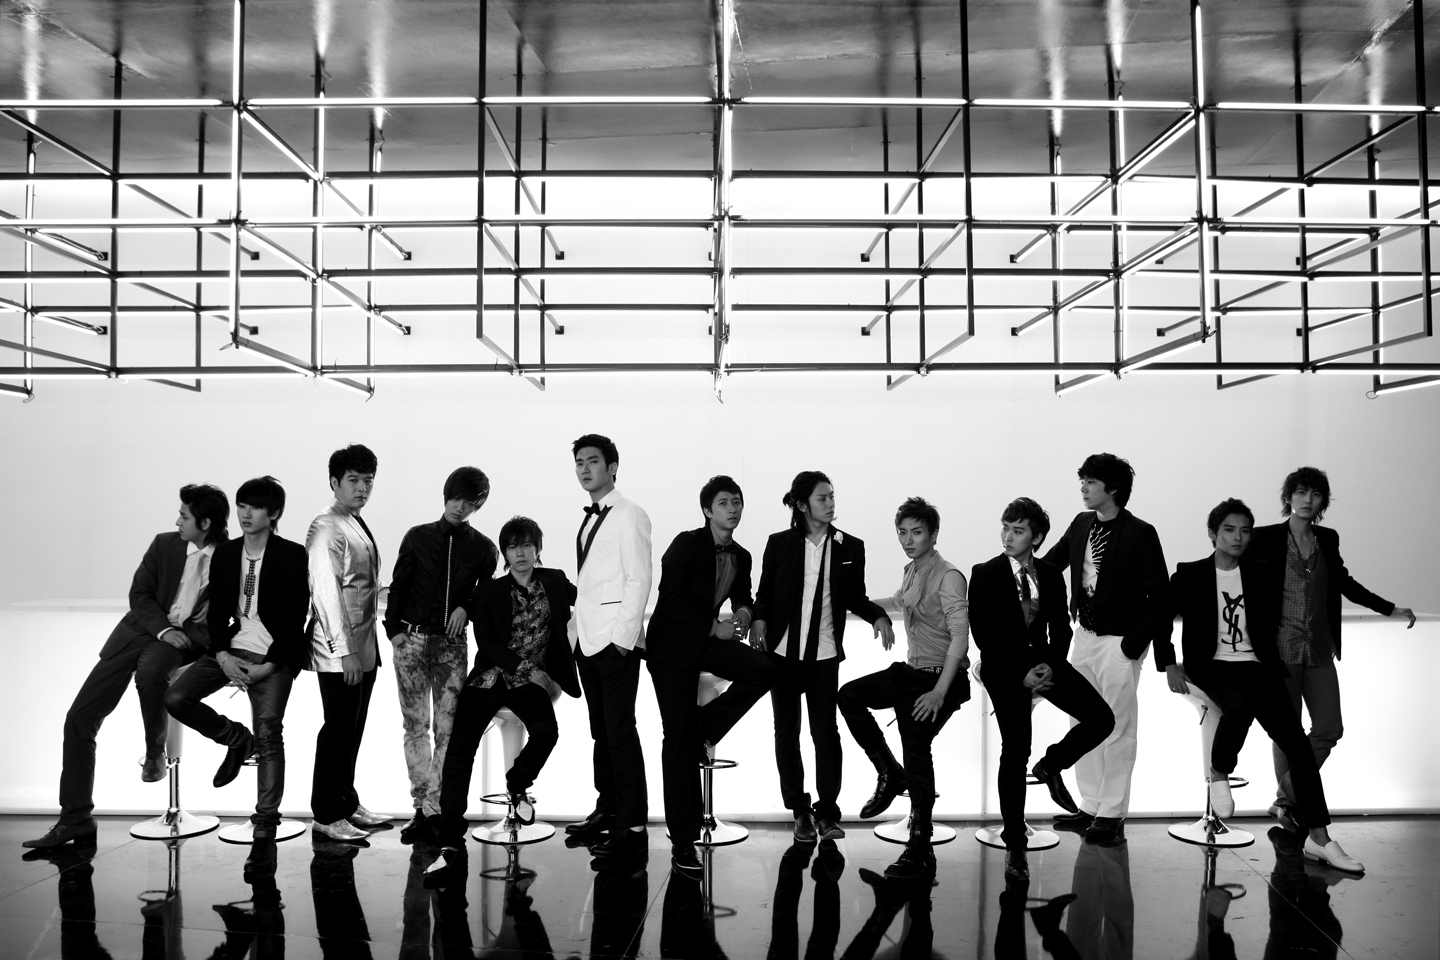  ! images Super Junior HD wallpaper and background photos 22450060